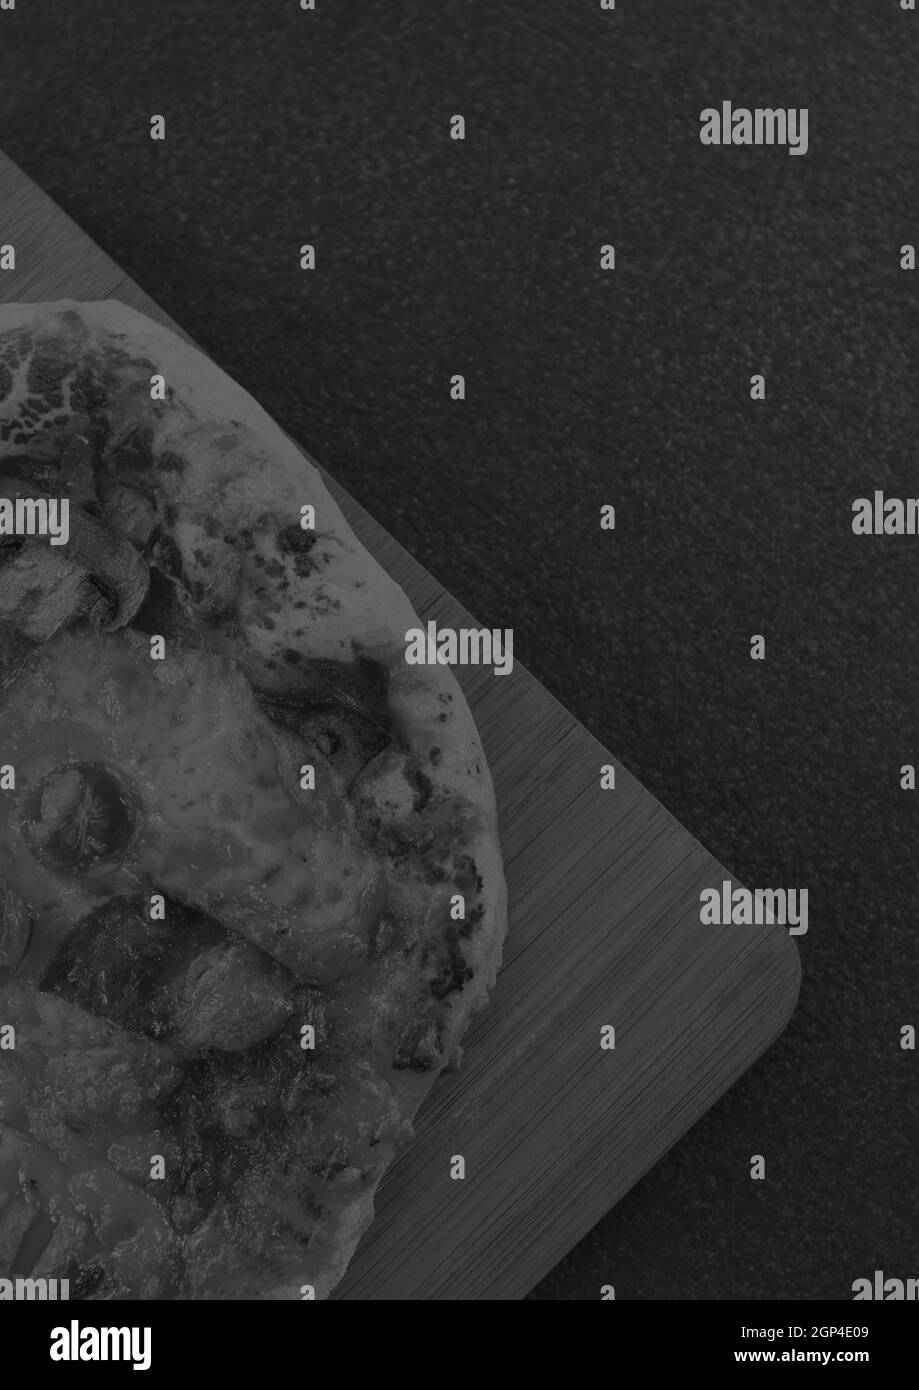 Composition of close up of fresh black and white pizza on gray background Stock Photo